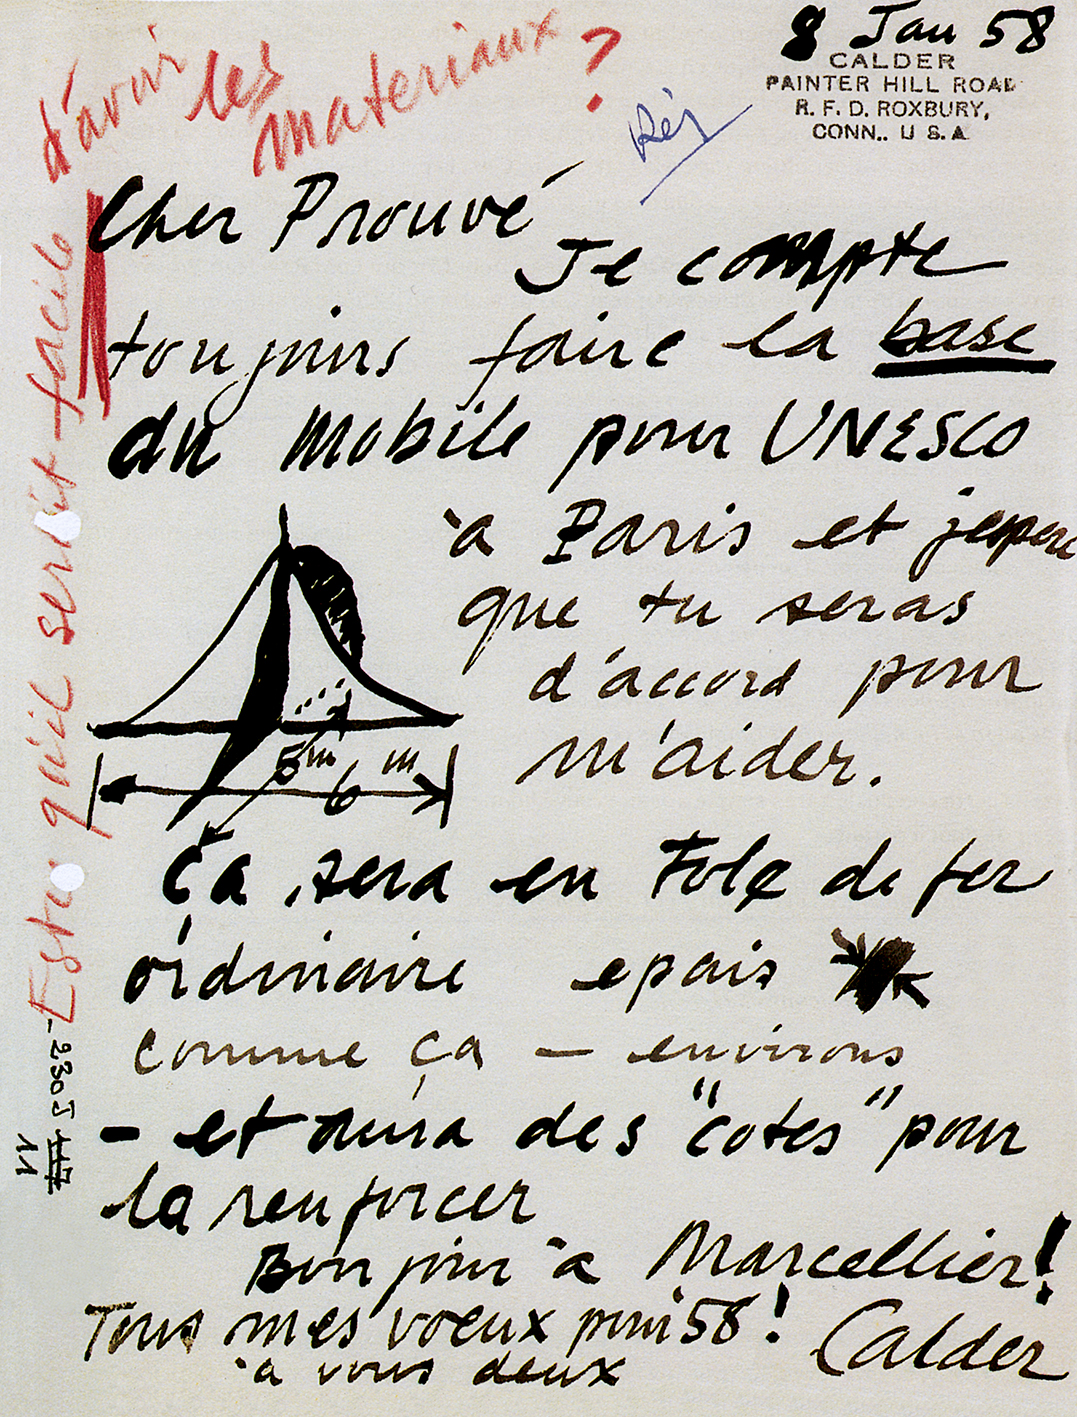 Letter from Alexander Calder to Jean Prouvé, 8 January 1958.